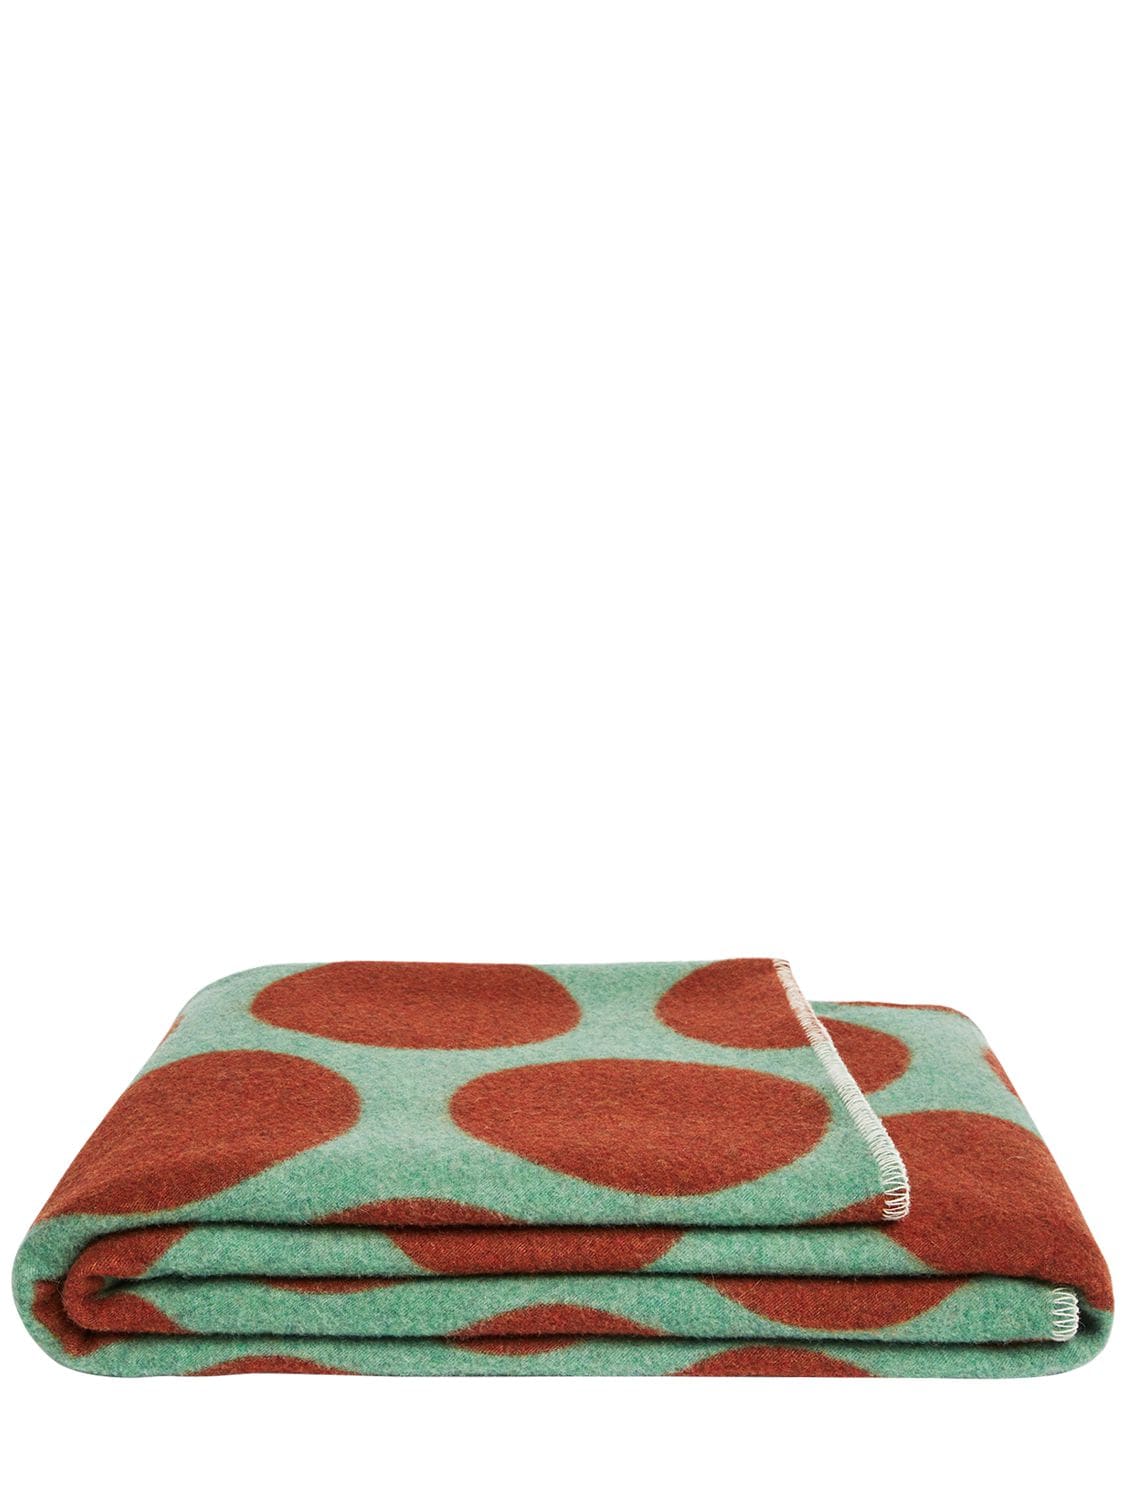 Colville Polka Dots Wool Blend Throw In Green,brown